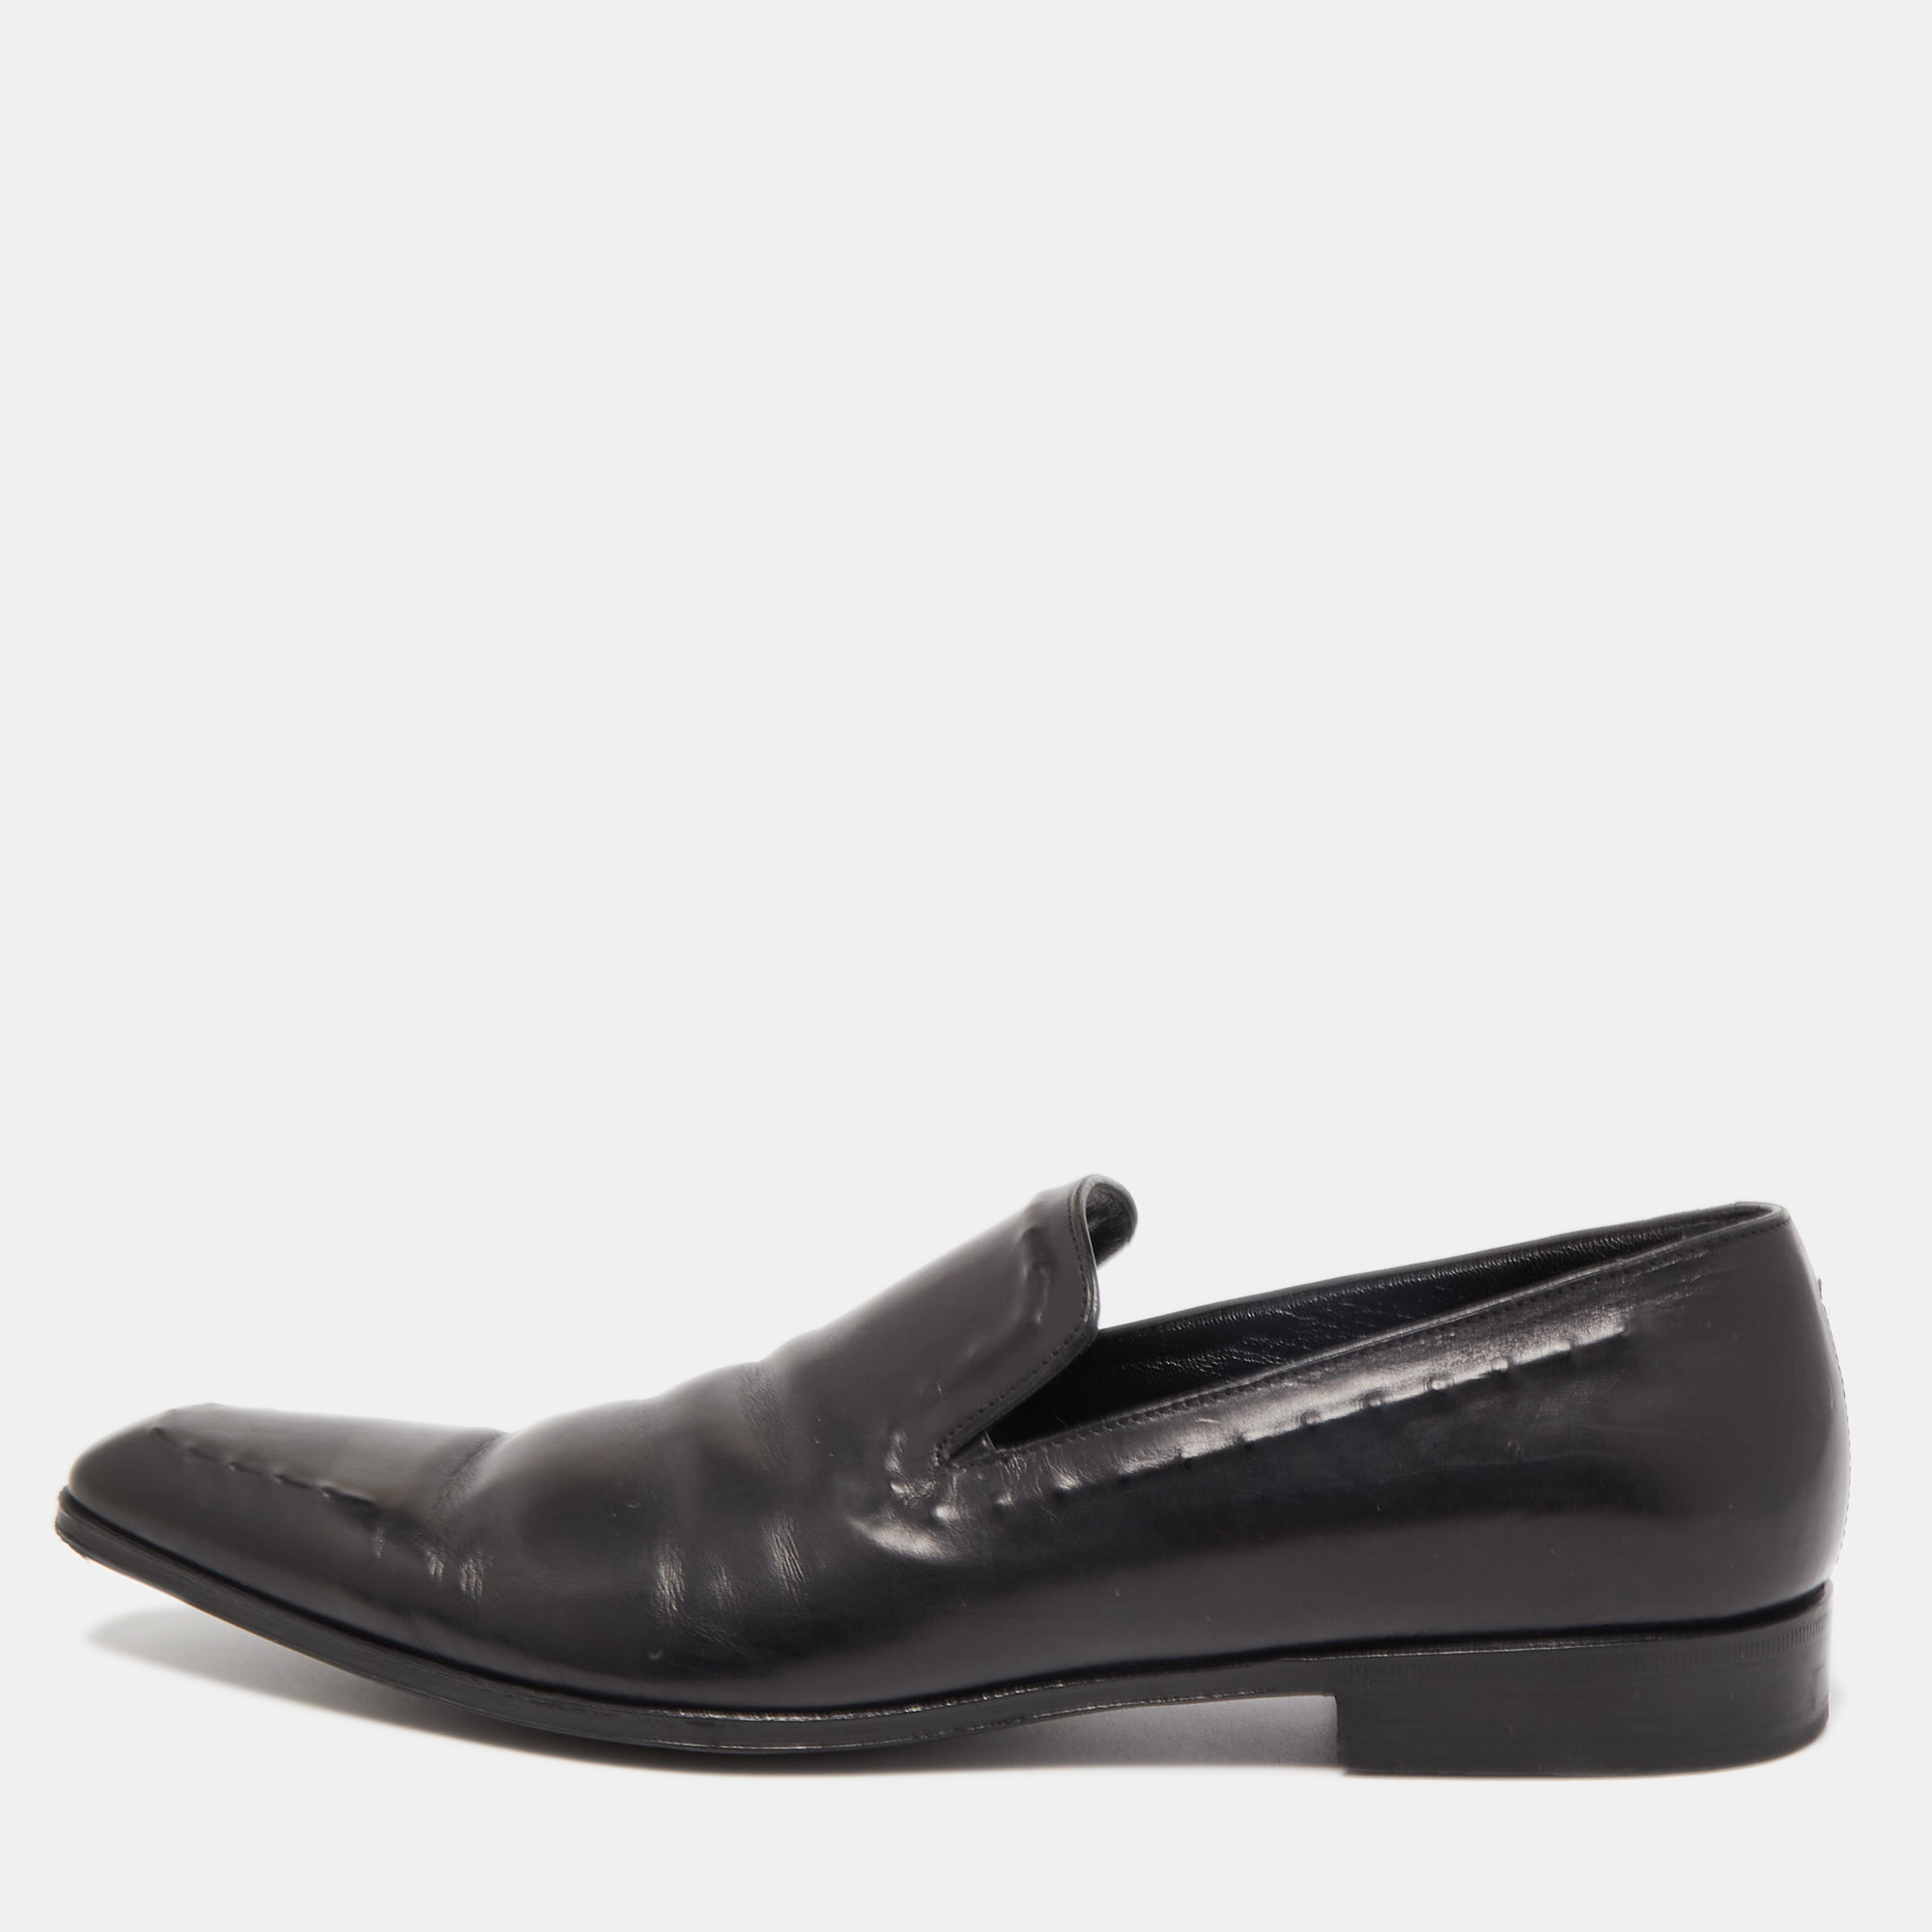 Pre-owned Dolce & Gabbana Black Leather Slip On Loafers Size 42.5